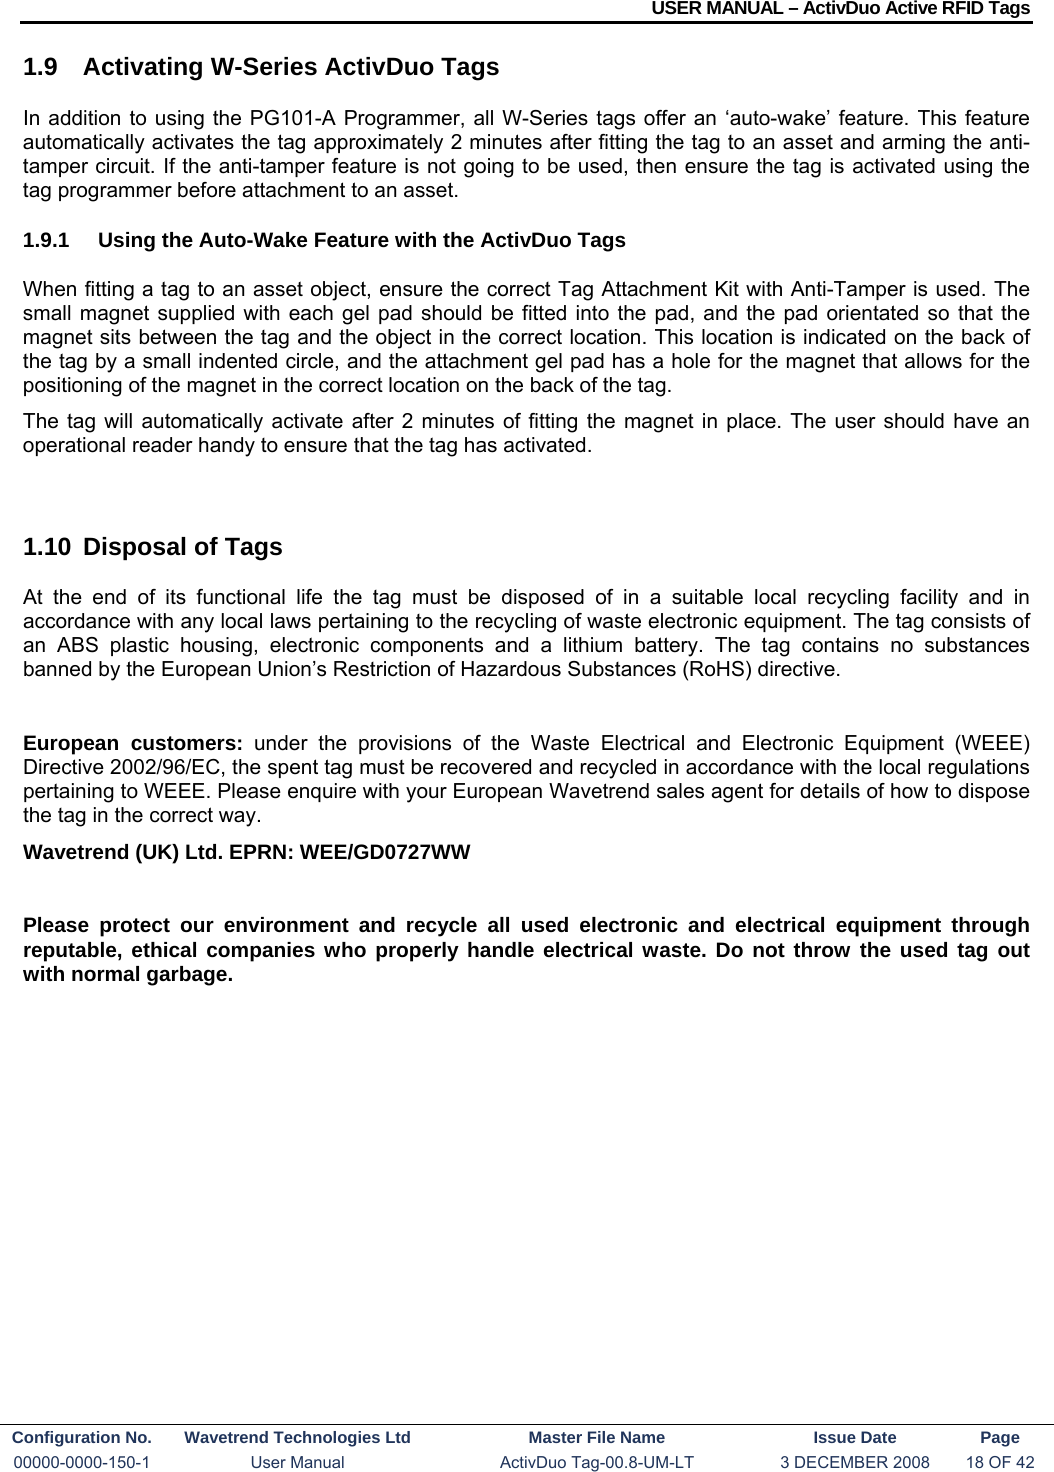 USER MANUAL – ActivDuo Active RFID Tags Configuration No.  Wavetrend Technologies Ltd  Master File Name   Issue Date  Page 00000-0000-150-1  User Manual  ActivDuo Tag-00.8-UM-LT  3 DECEMBER 2008  18 OF 42  1.9  Activating W-Series ActivDuo Tags In addition to using the PG101-A Programmer, all W-Series tags offer an ‘auto-wake’ feature. This feature automatically activates the tag approximately 2 minutes after fitting the tag to an asset and arming the anti-tamper circuit. If the anti-tamper feature is not going to be used, then ensure the tag is activated using the tag programmer before attachment to an asset. 1.9.1  Using the Auto-Wake Feature with the ActivDuo Tags When fitting a tag to an asset object, ensure the correct Tag Attachment Kit with Anti-Tamper is used. The small magnet supplied with each gel pad should be fitted into the pad, and the pad orientated so that the magnet sits between the tag and the object in the correct location. This location is indicated on the back of the tag by a small indented circle, and the attachment gel pad has a hole for the magnet that allows for the positioning of the magnet in the correct location on the back of the tag. The tag will automatically activate after 2 minutes of fitting the magnet in place. The user should have an operational reader handy to ensure that the tag has activated.  1.10  Disposal of Tags At the end of its functional life the tag must be disposed of in a suitable local recycling facility and in accordance with any local laws pertaining to the recycling of waste electronic equipment. The tag consists of an ABS plastic housing, electronic components and a lithium battery. The tag contains no substances banned by the European Union’s Restriction of Hazardous Substances (RoHS) directive.  European customers: under the provisions of the Waste Electrical and Electronic Equipment (WEEE) Directive 2002/96/EC, the spent tag must be recovered and recycled in accordance with the local regulations pertaining to WEEE. Please enquire with your European Wavetrend sales agent for details of how to dispose the tag in the correct way. Wavetrend (UK) Ltd. EPRN: WEE/GD0727WW  Please protect our environment and recycle all used electronic and electrical equipment through reputable, ethical companies who properly handle electrical waste. Do not throw the used tag out with normal garbage.  